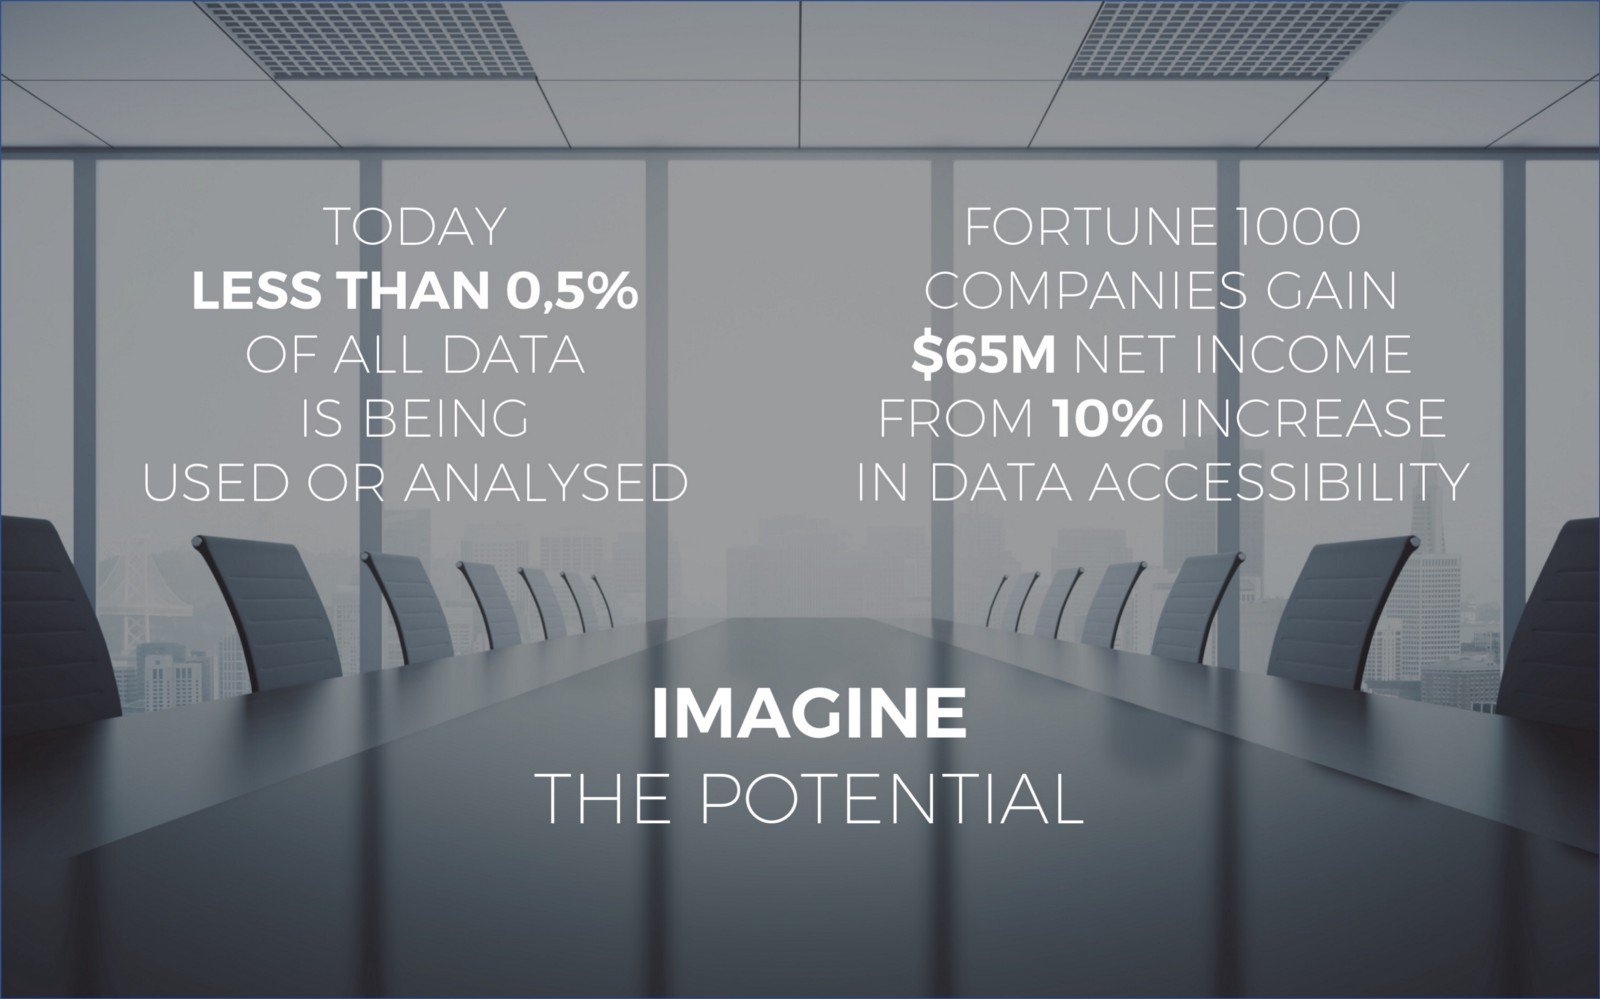 Today less than 0.5% of all data is being used or analysed. Fortune 1000 companies gain $65m net income from 10% increase in data accessibility. Imagine the potential - Salesflare sales deck